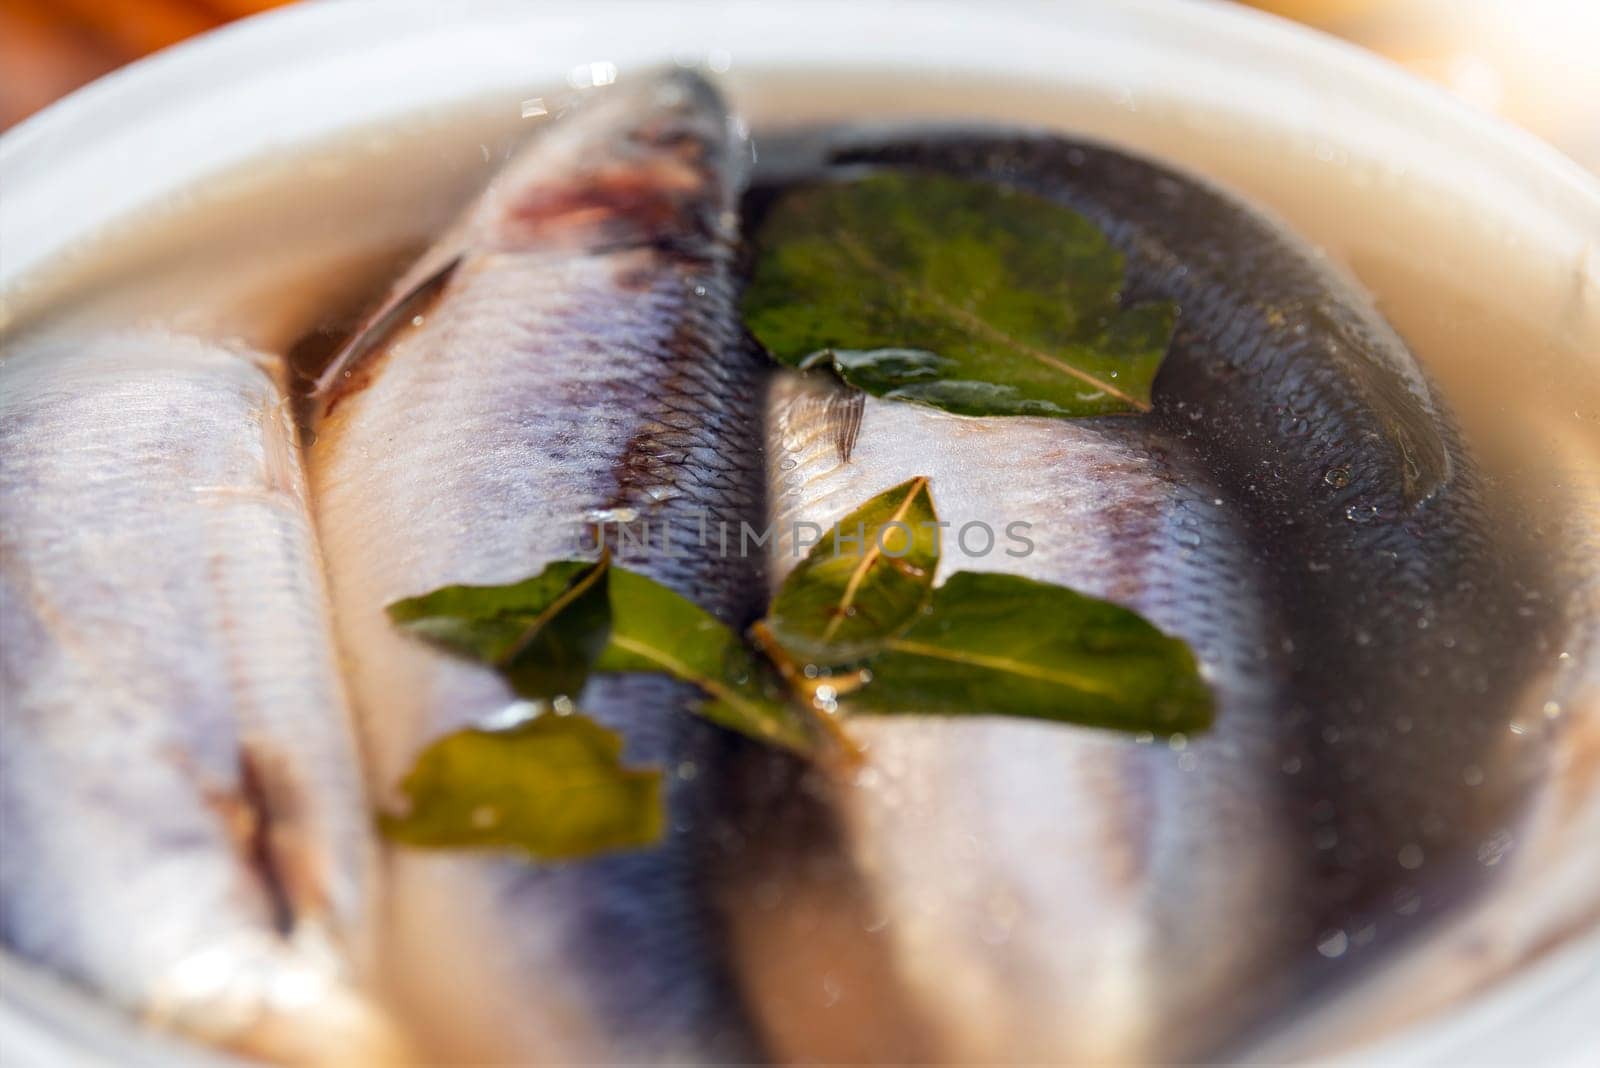 The process of salting or pickling herring. Large herrings are salted in a marinade with spices. by SERSOL